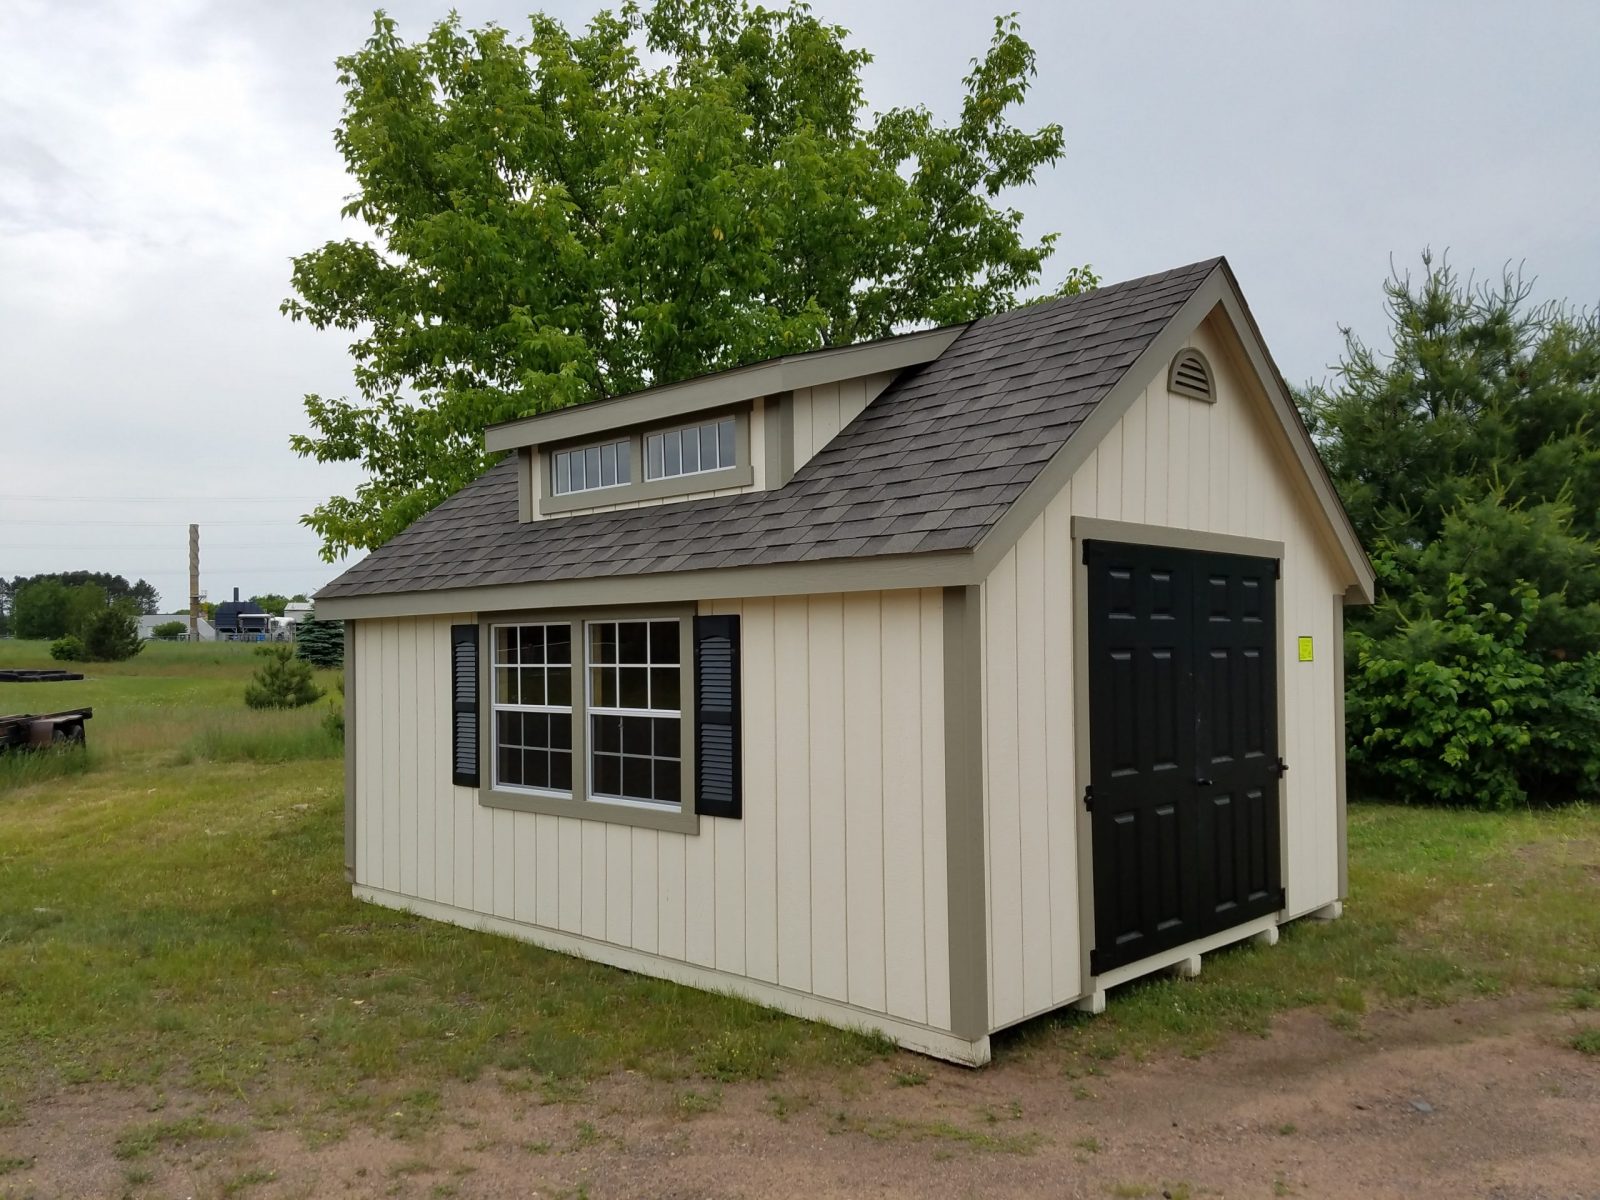 amish-made storage shed in minnesota and wisconsin 2020